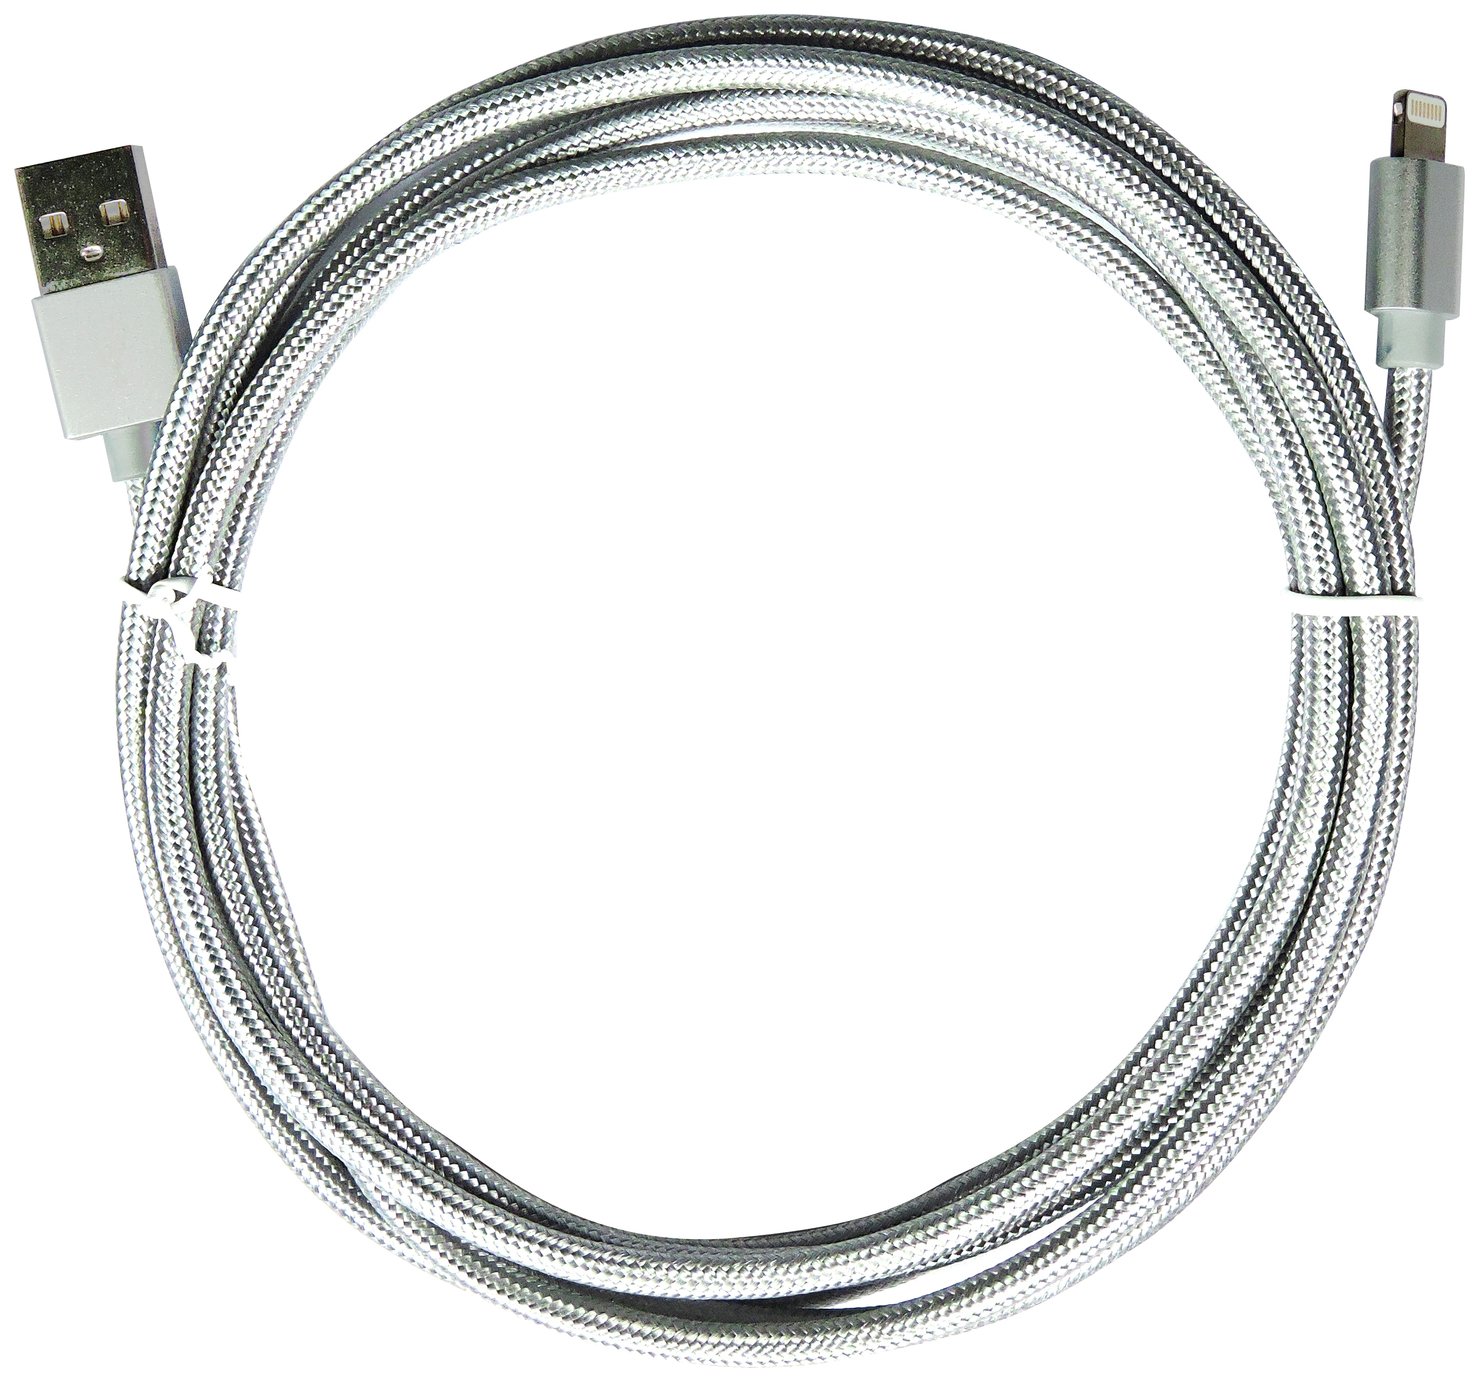 2m Braided Lightning Cable Review